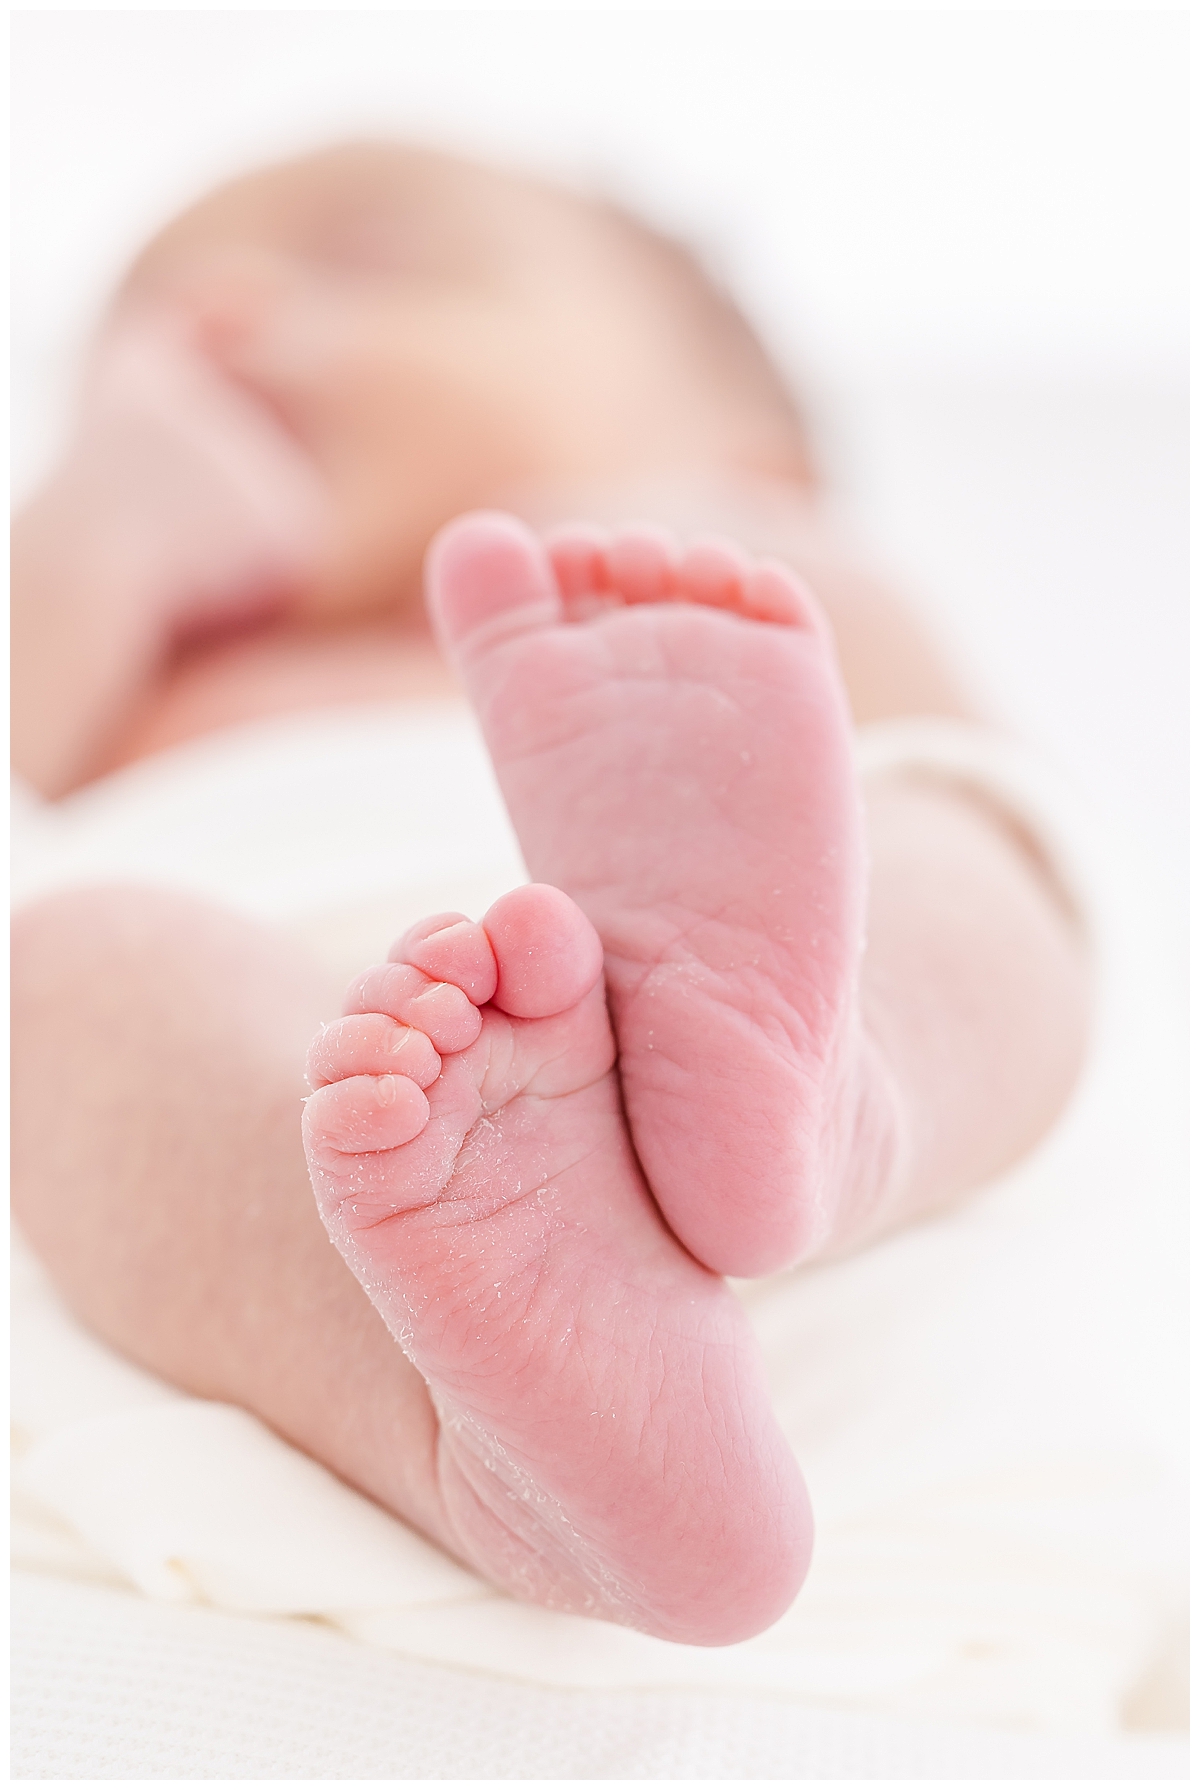 Newborn wrapped in white swaddle with close up of feet details